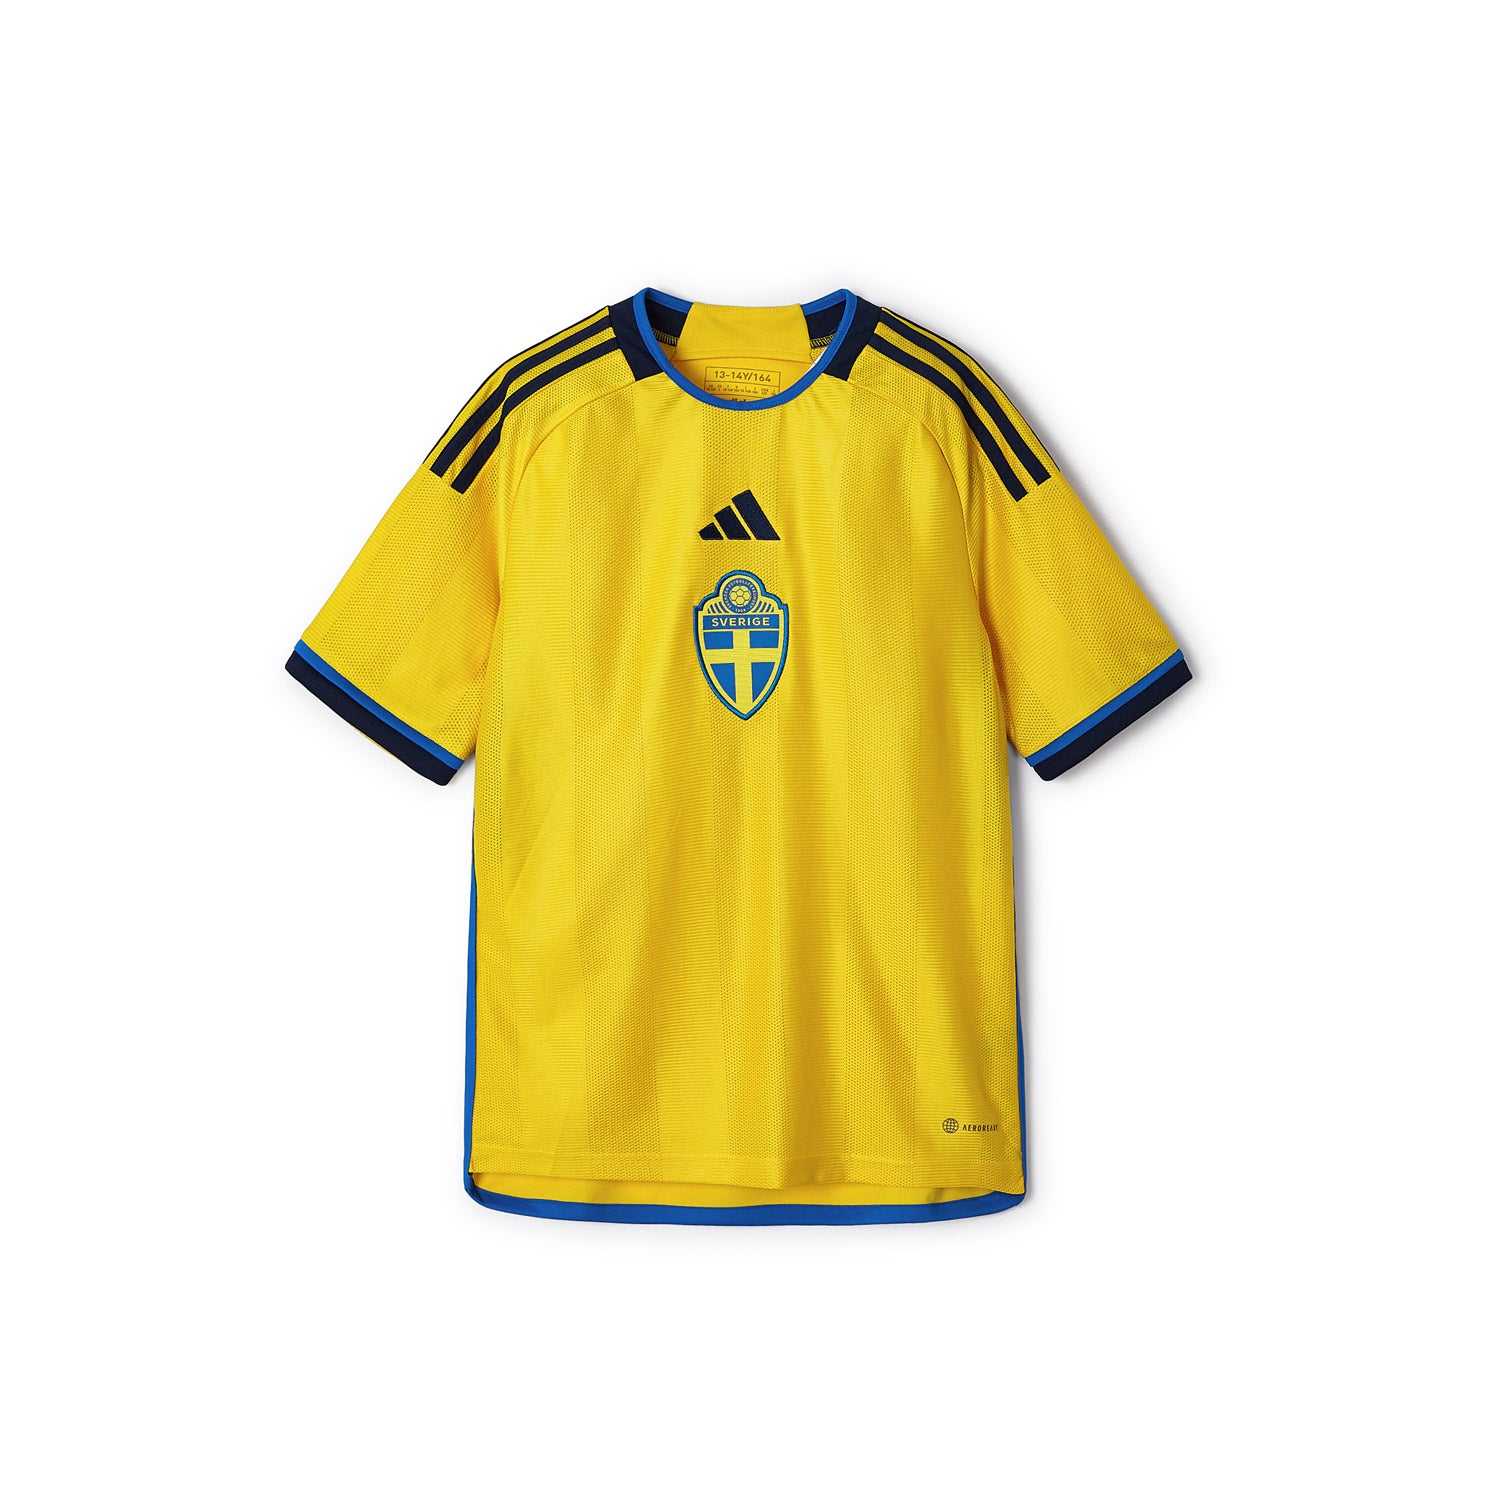 adidas Sweden Home Football Shirt - Youth